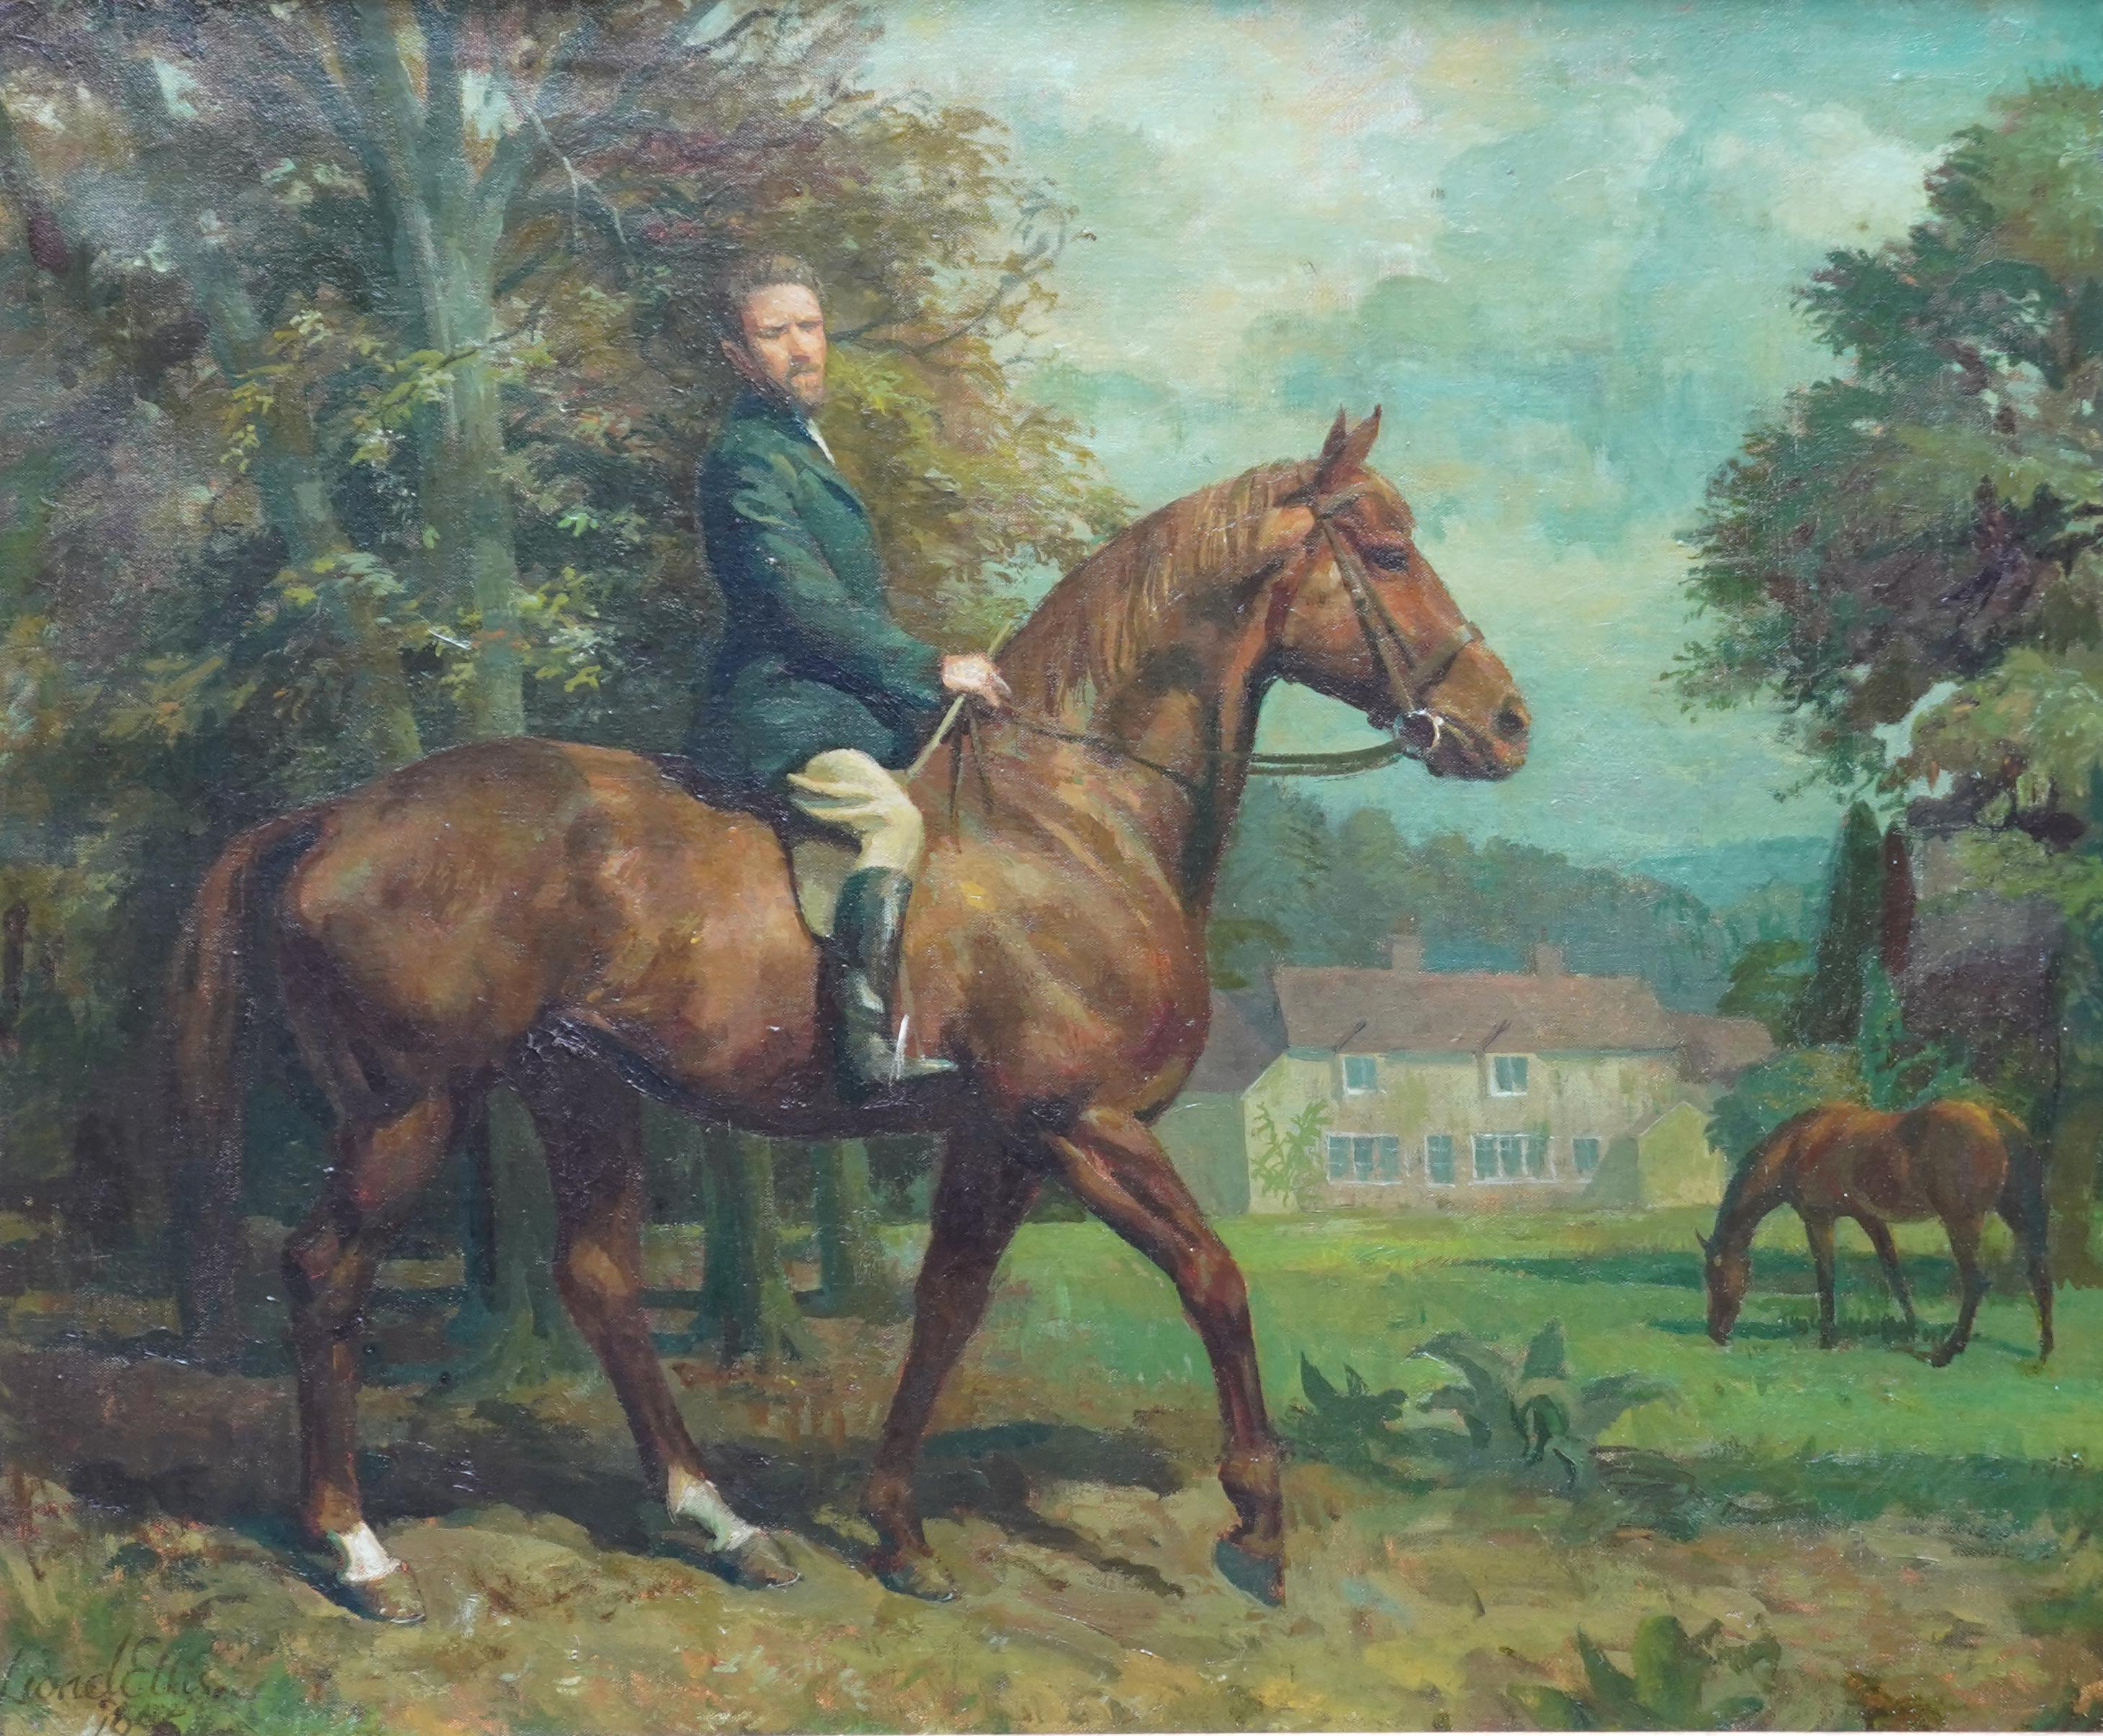 Self Portrait on Horse in Landscape - British 50's art equine rider oil painting For Sale 5